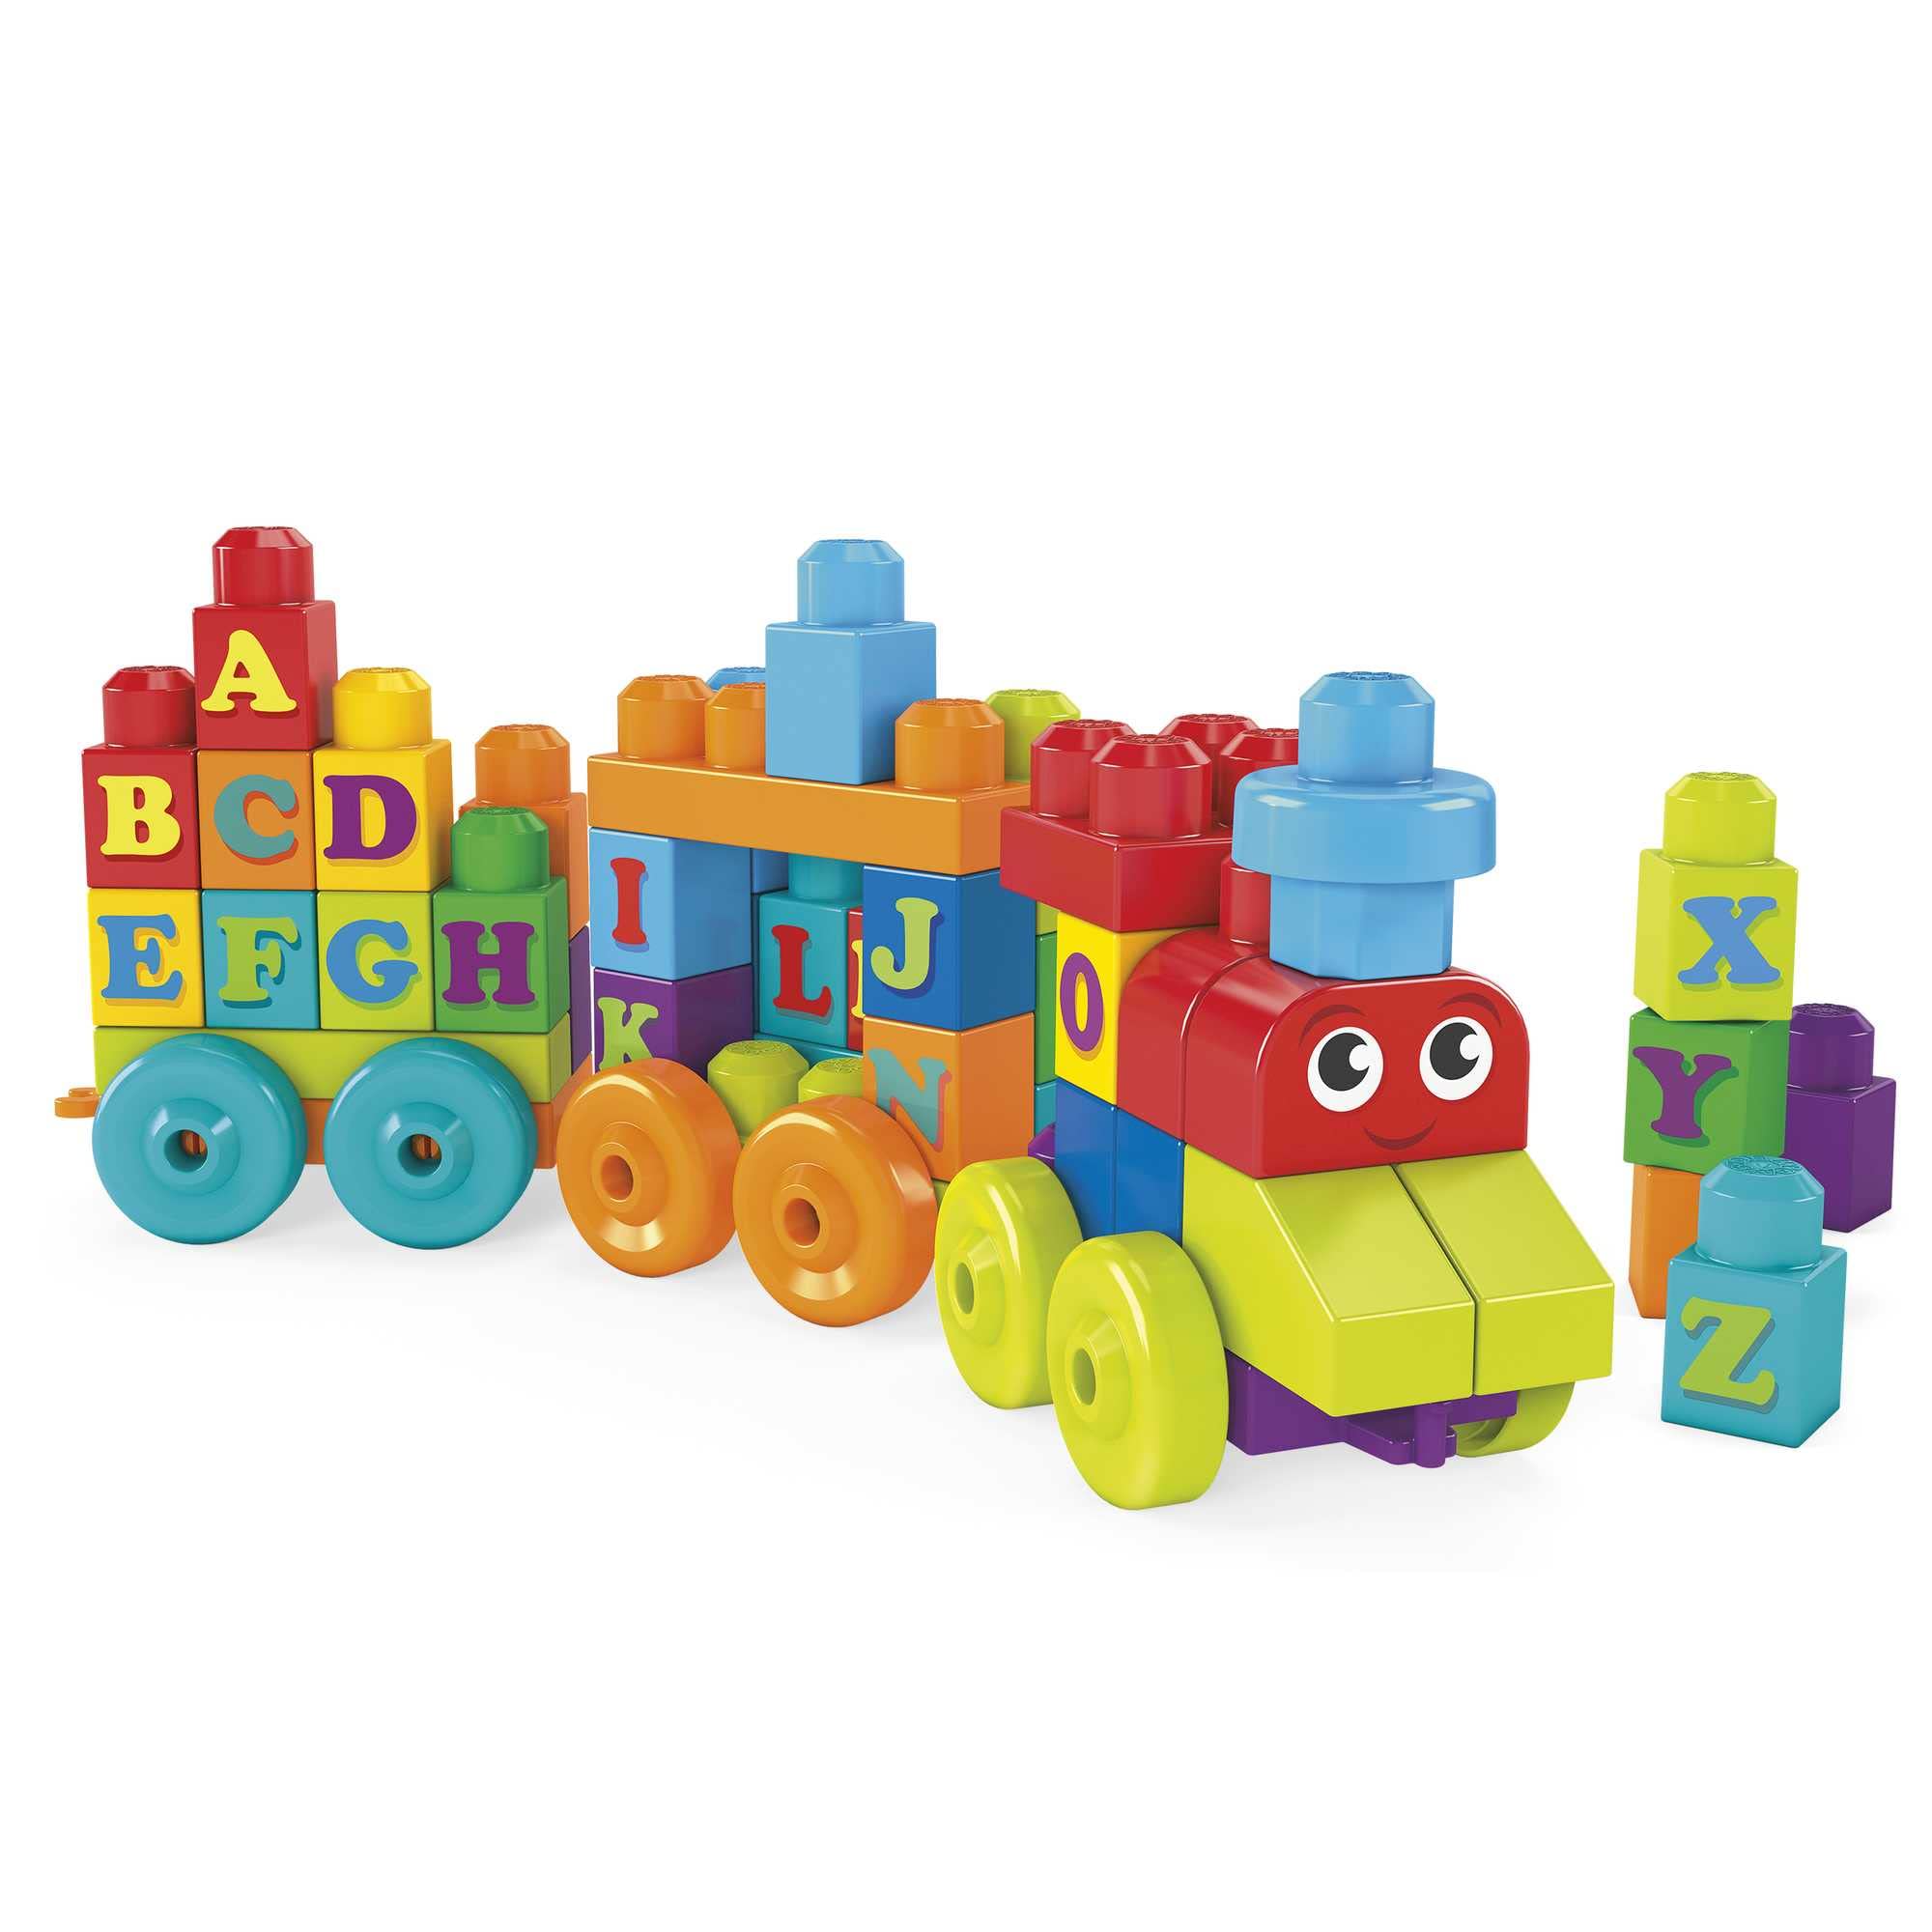 MEGA BLOKS Fisher-Price ABC Blocks Building Toy, ABC Learning Train with 60 Pieces for Toddlers, Gift Ideas for Kids Age 1+ Years (Amazon Exclusive)